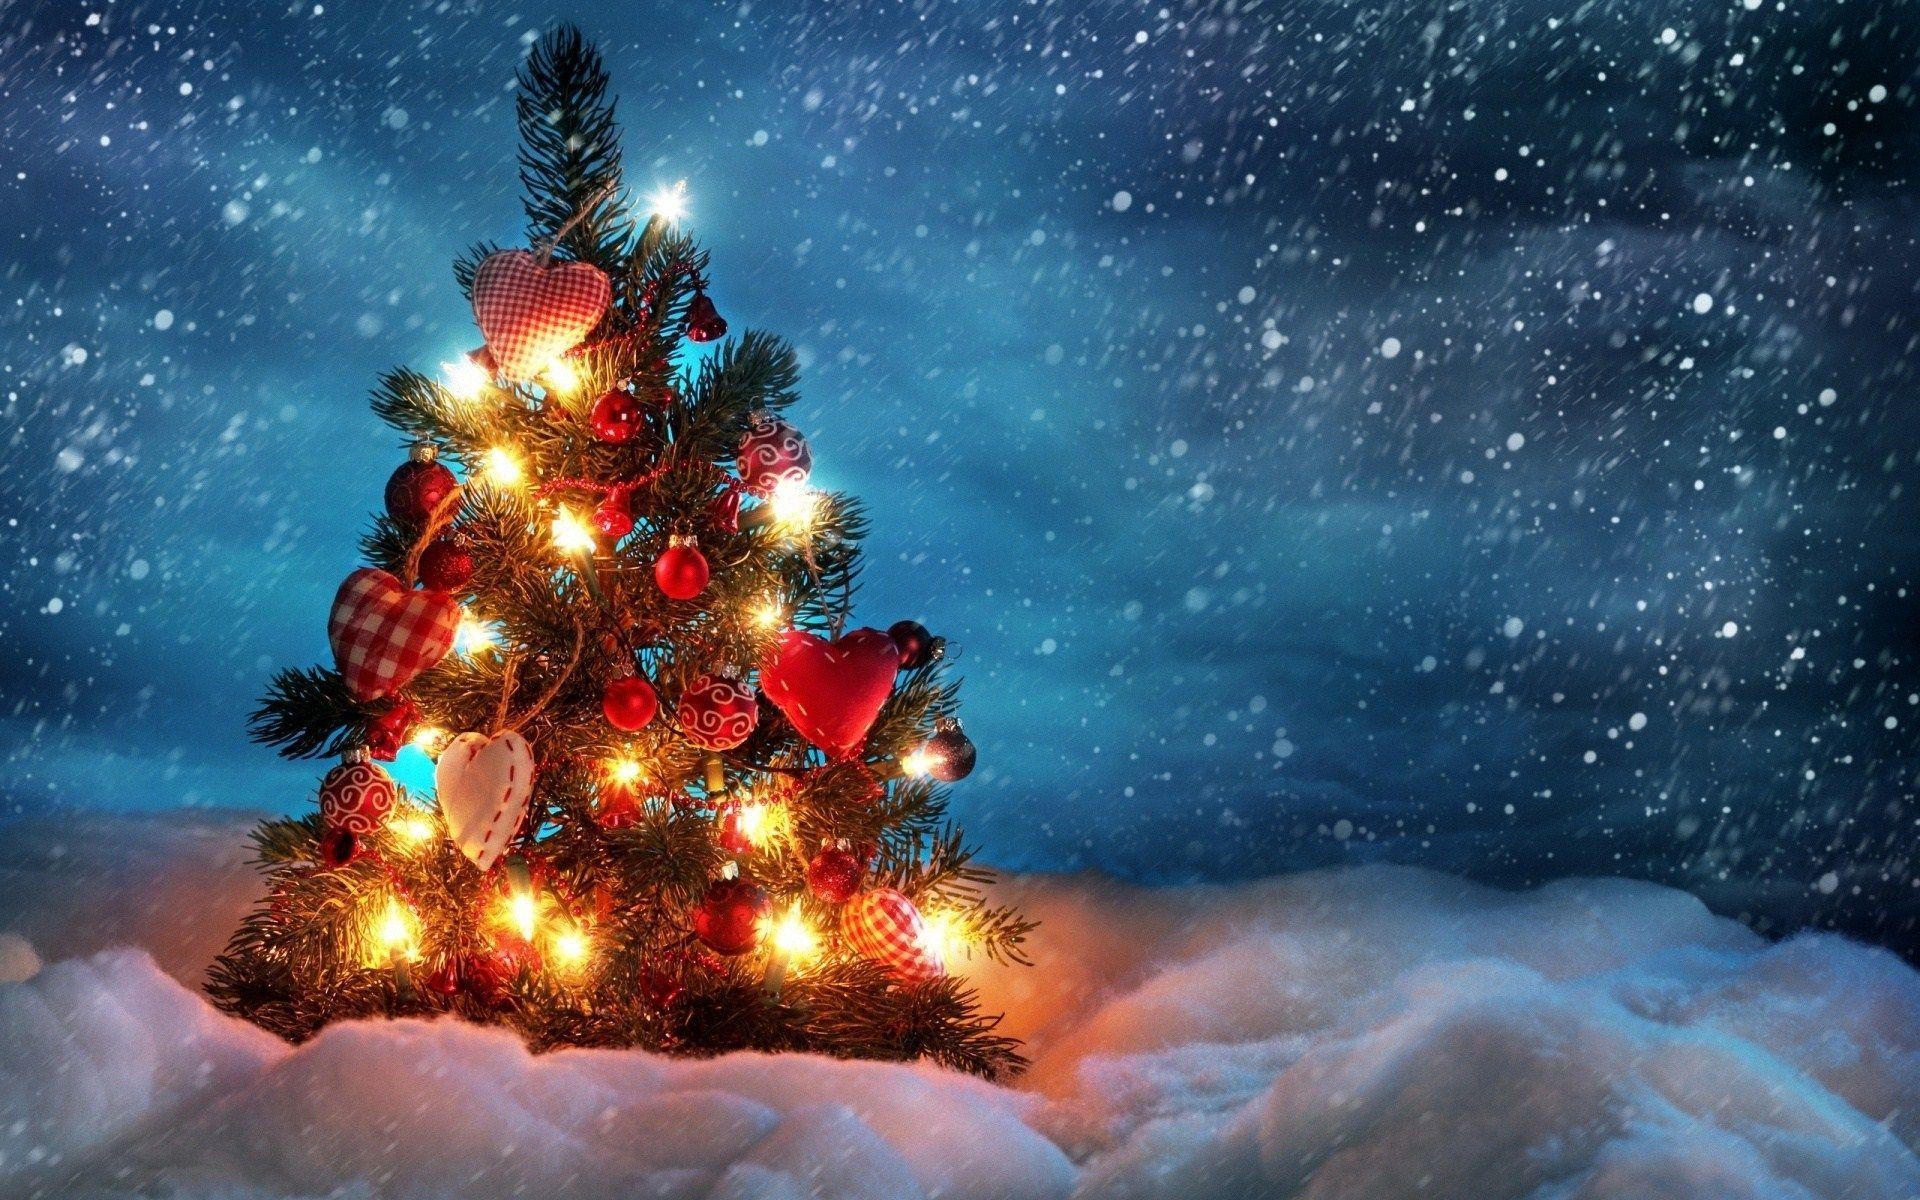 1920x1200 Winter Christmas Backgrounds | Wallpapers9